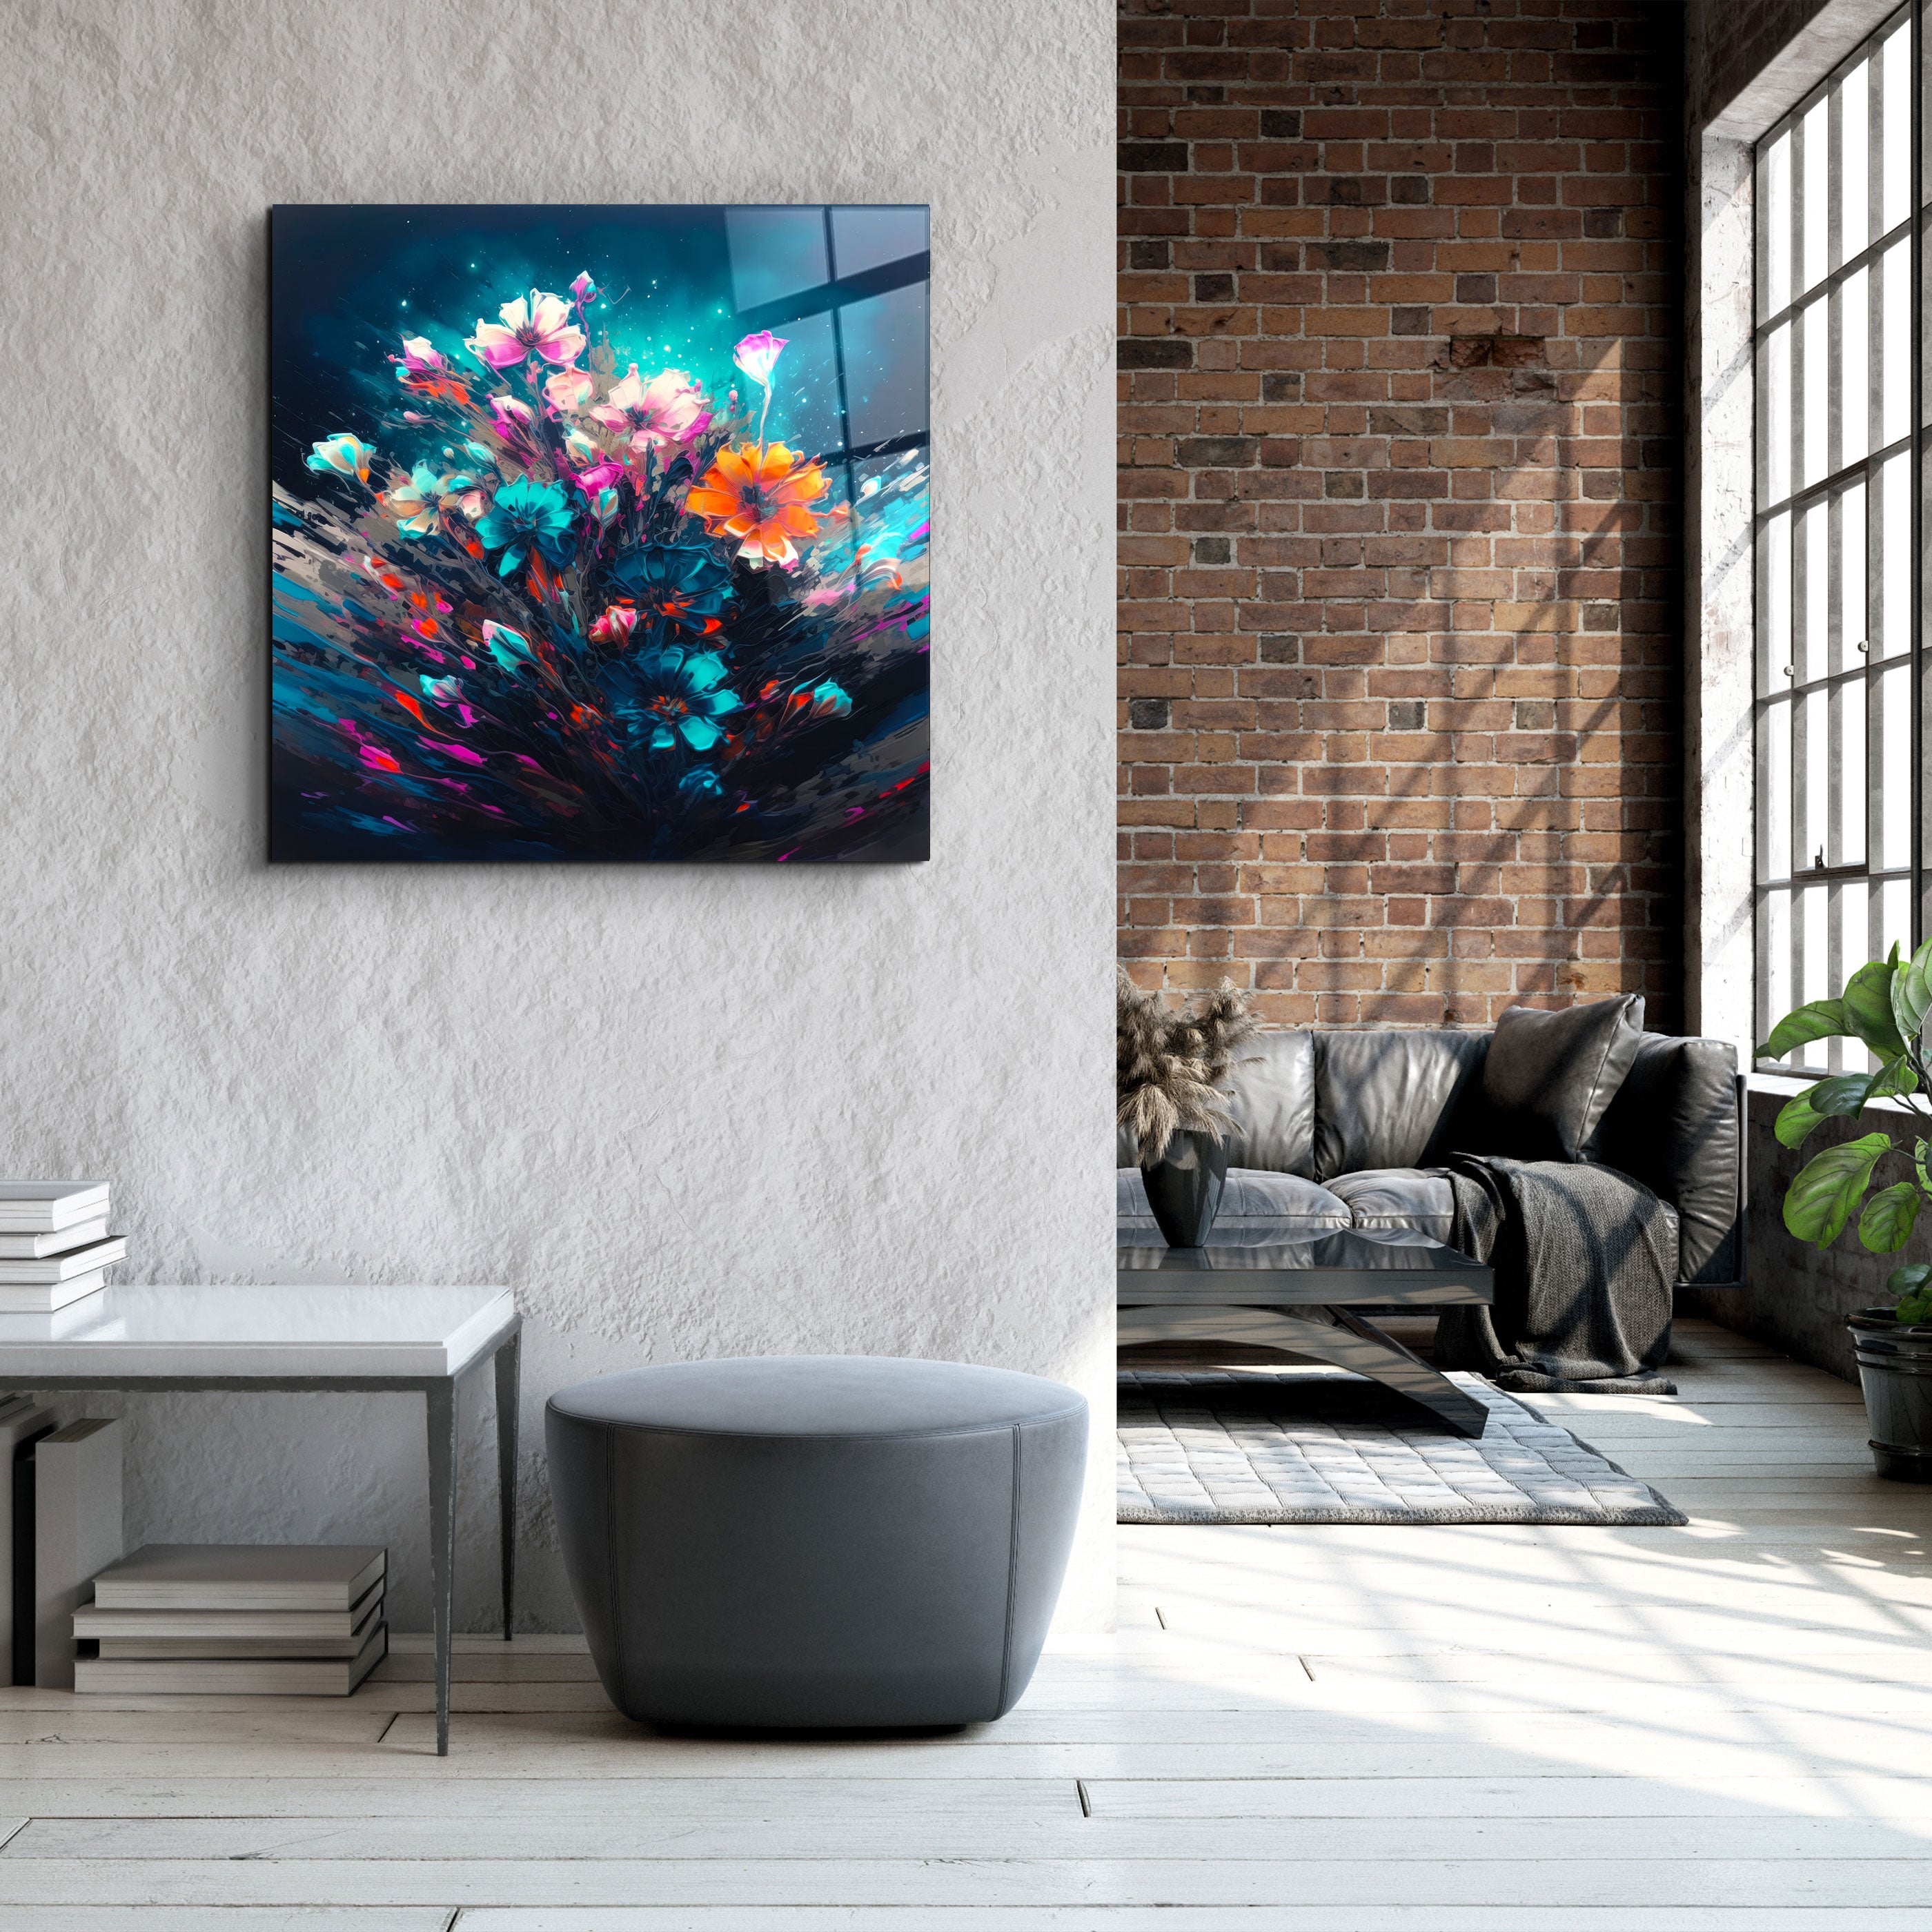 ."Oil Painting Flowers 1". Designers Collection Glass Wall Art